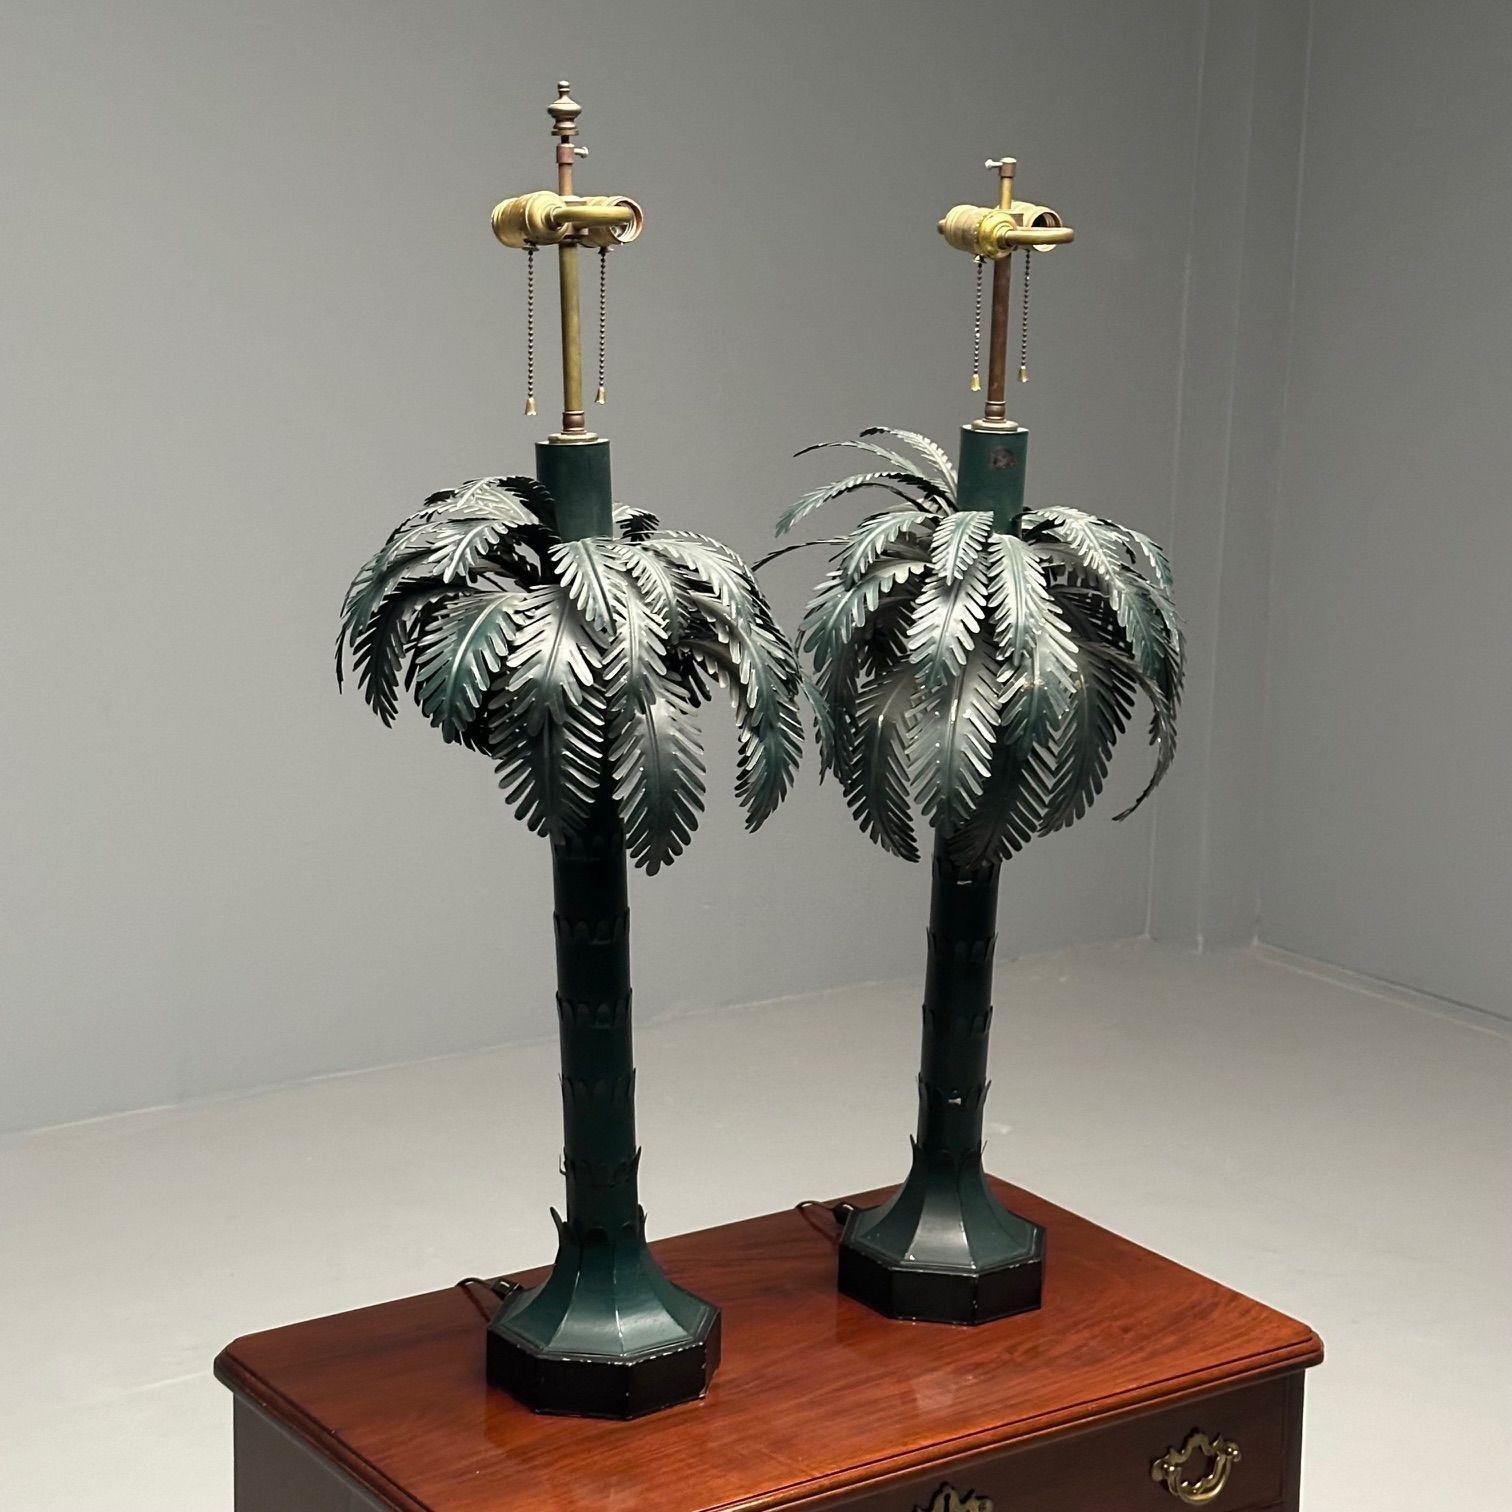 Maison Jansen Style, Mid-Century Modern, Palm Tree Lamps, Green, Metal, 1970s For Sale 6